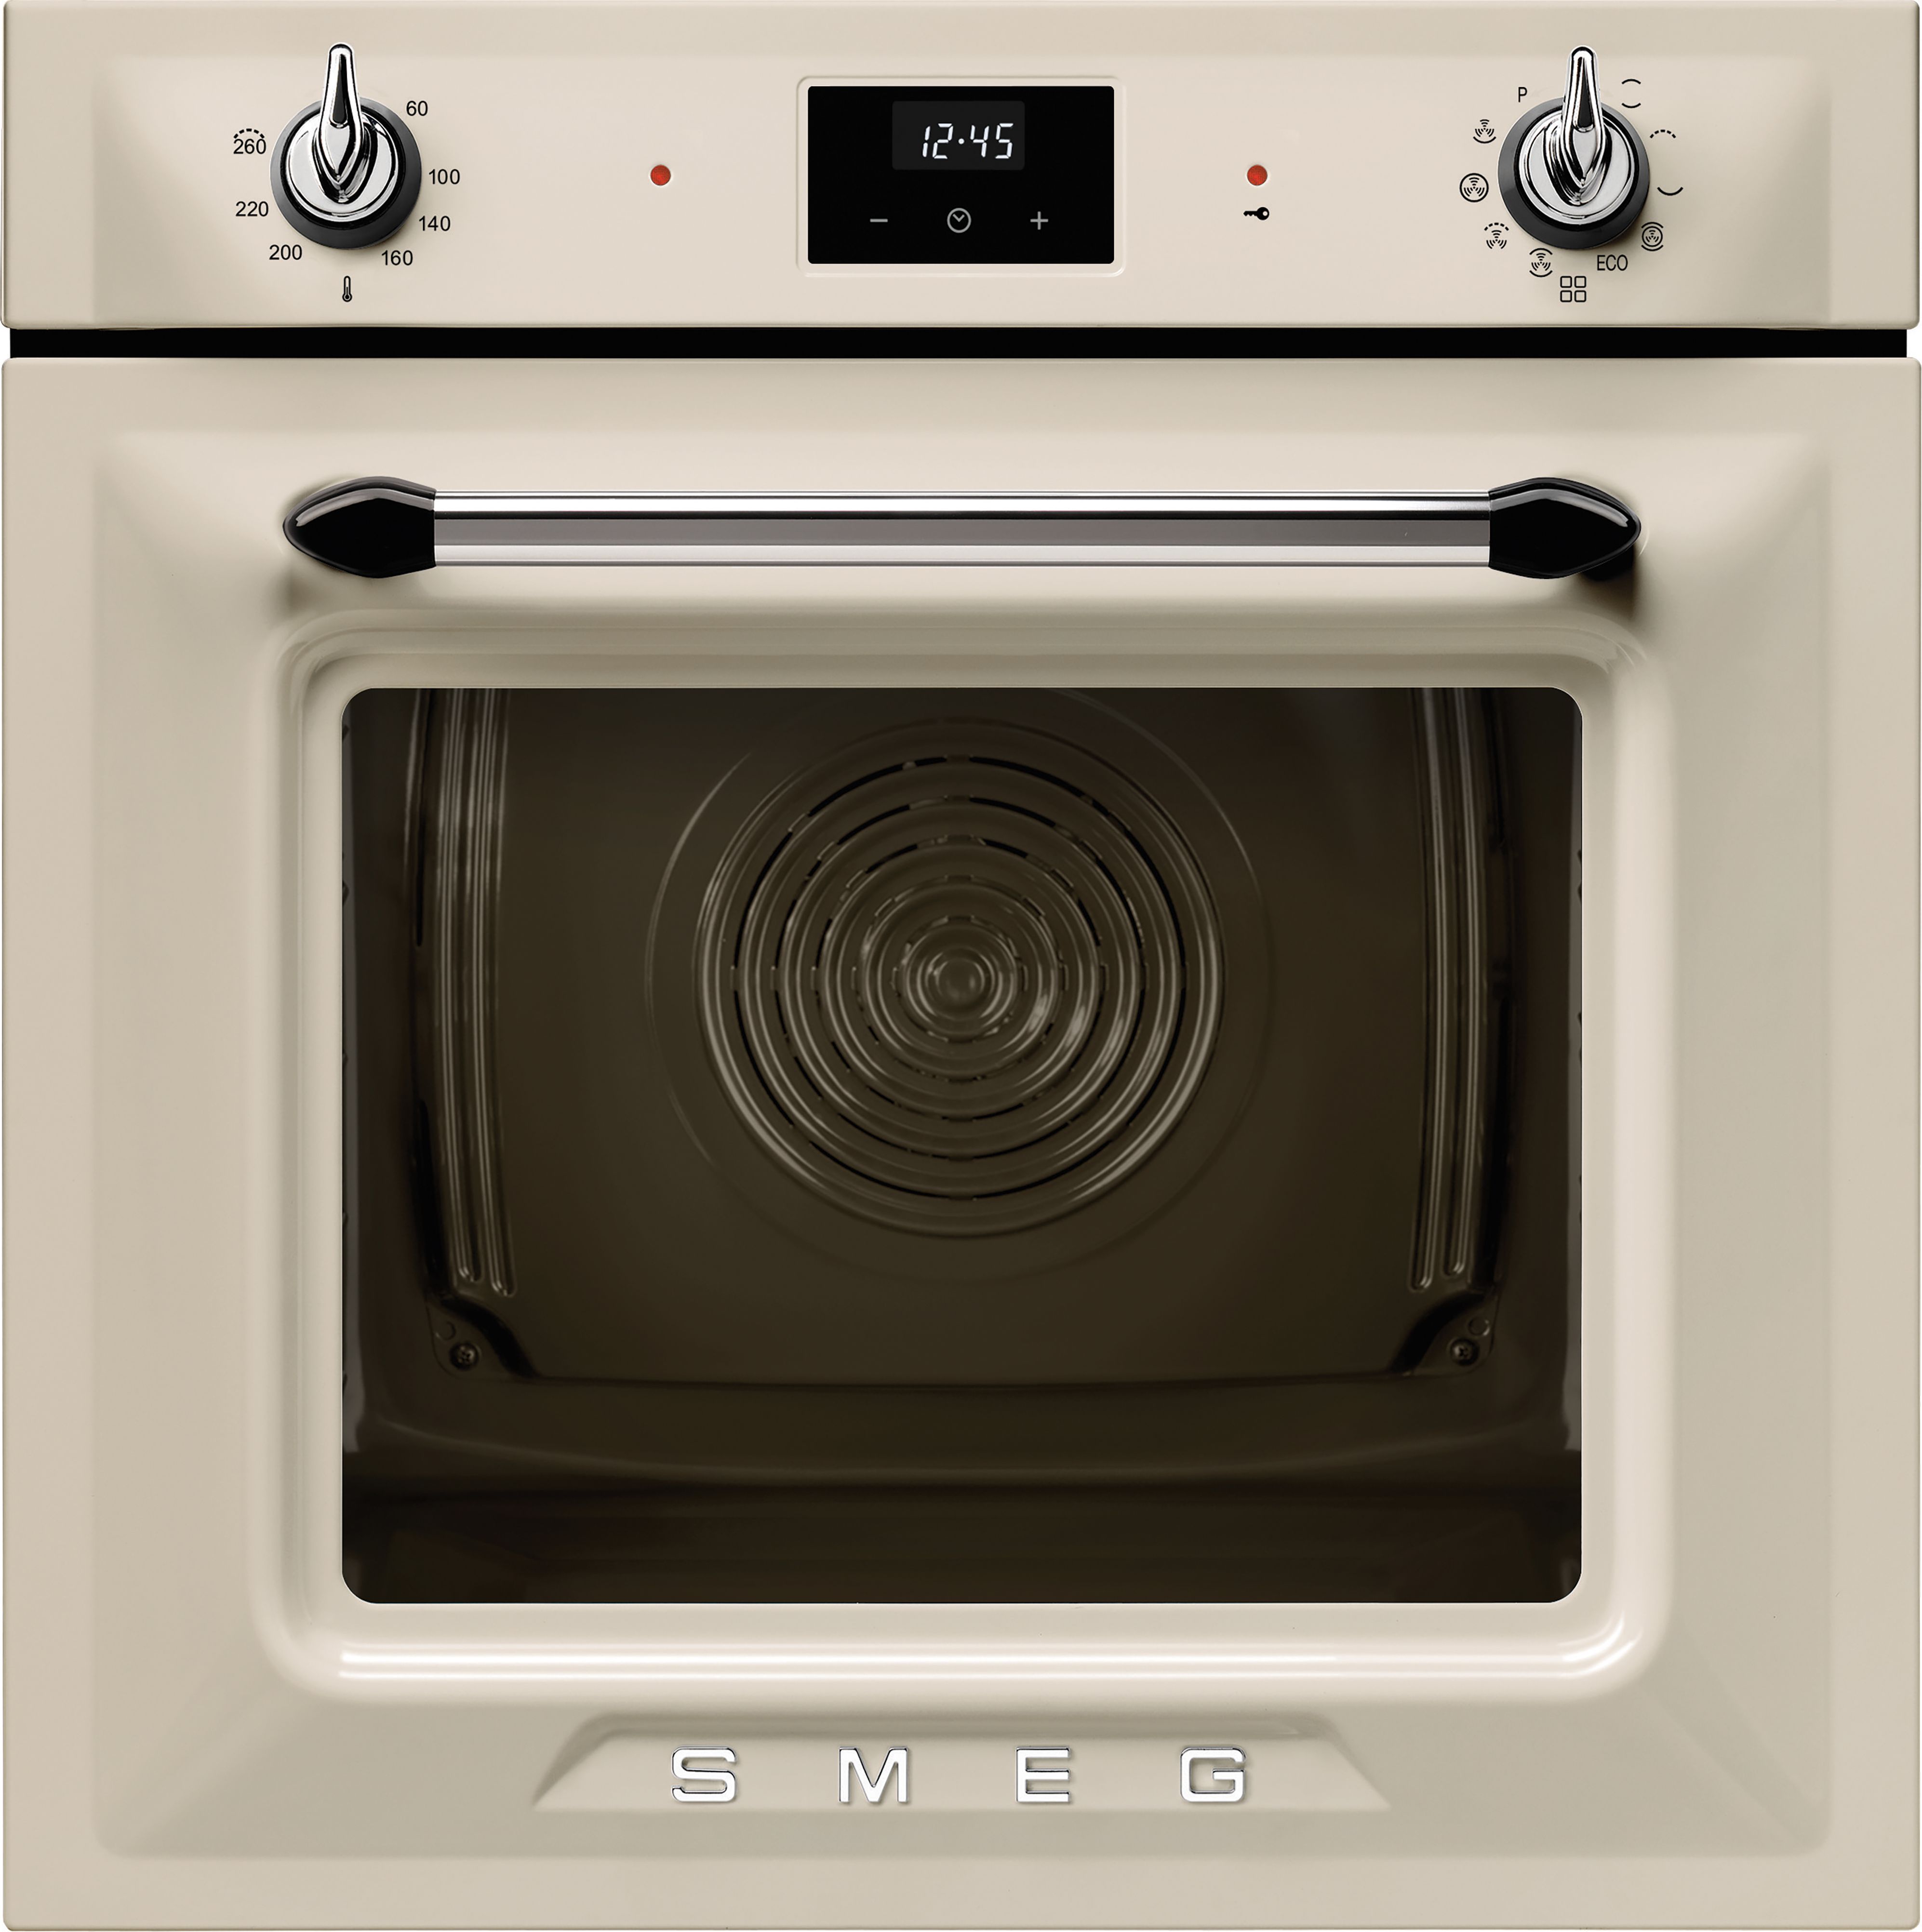 Smeg Victoria SOP6900TP Built In Electric Single Oven with Pyrolytic Cleaning - Cream - A Rated, Cream